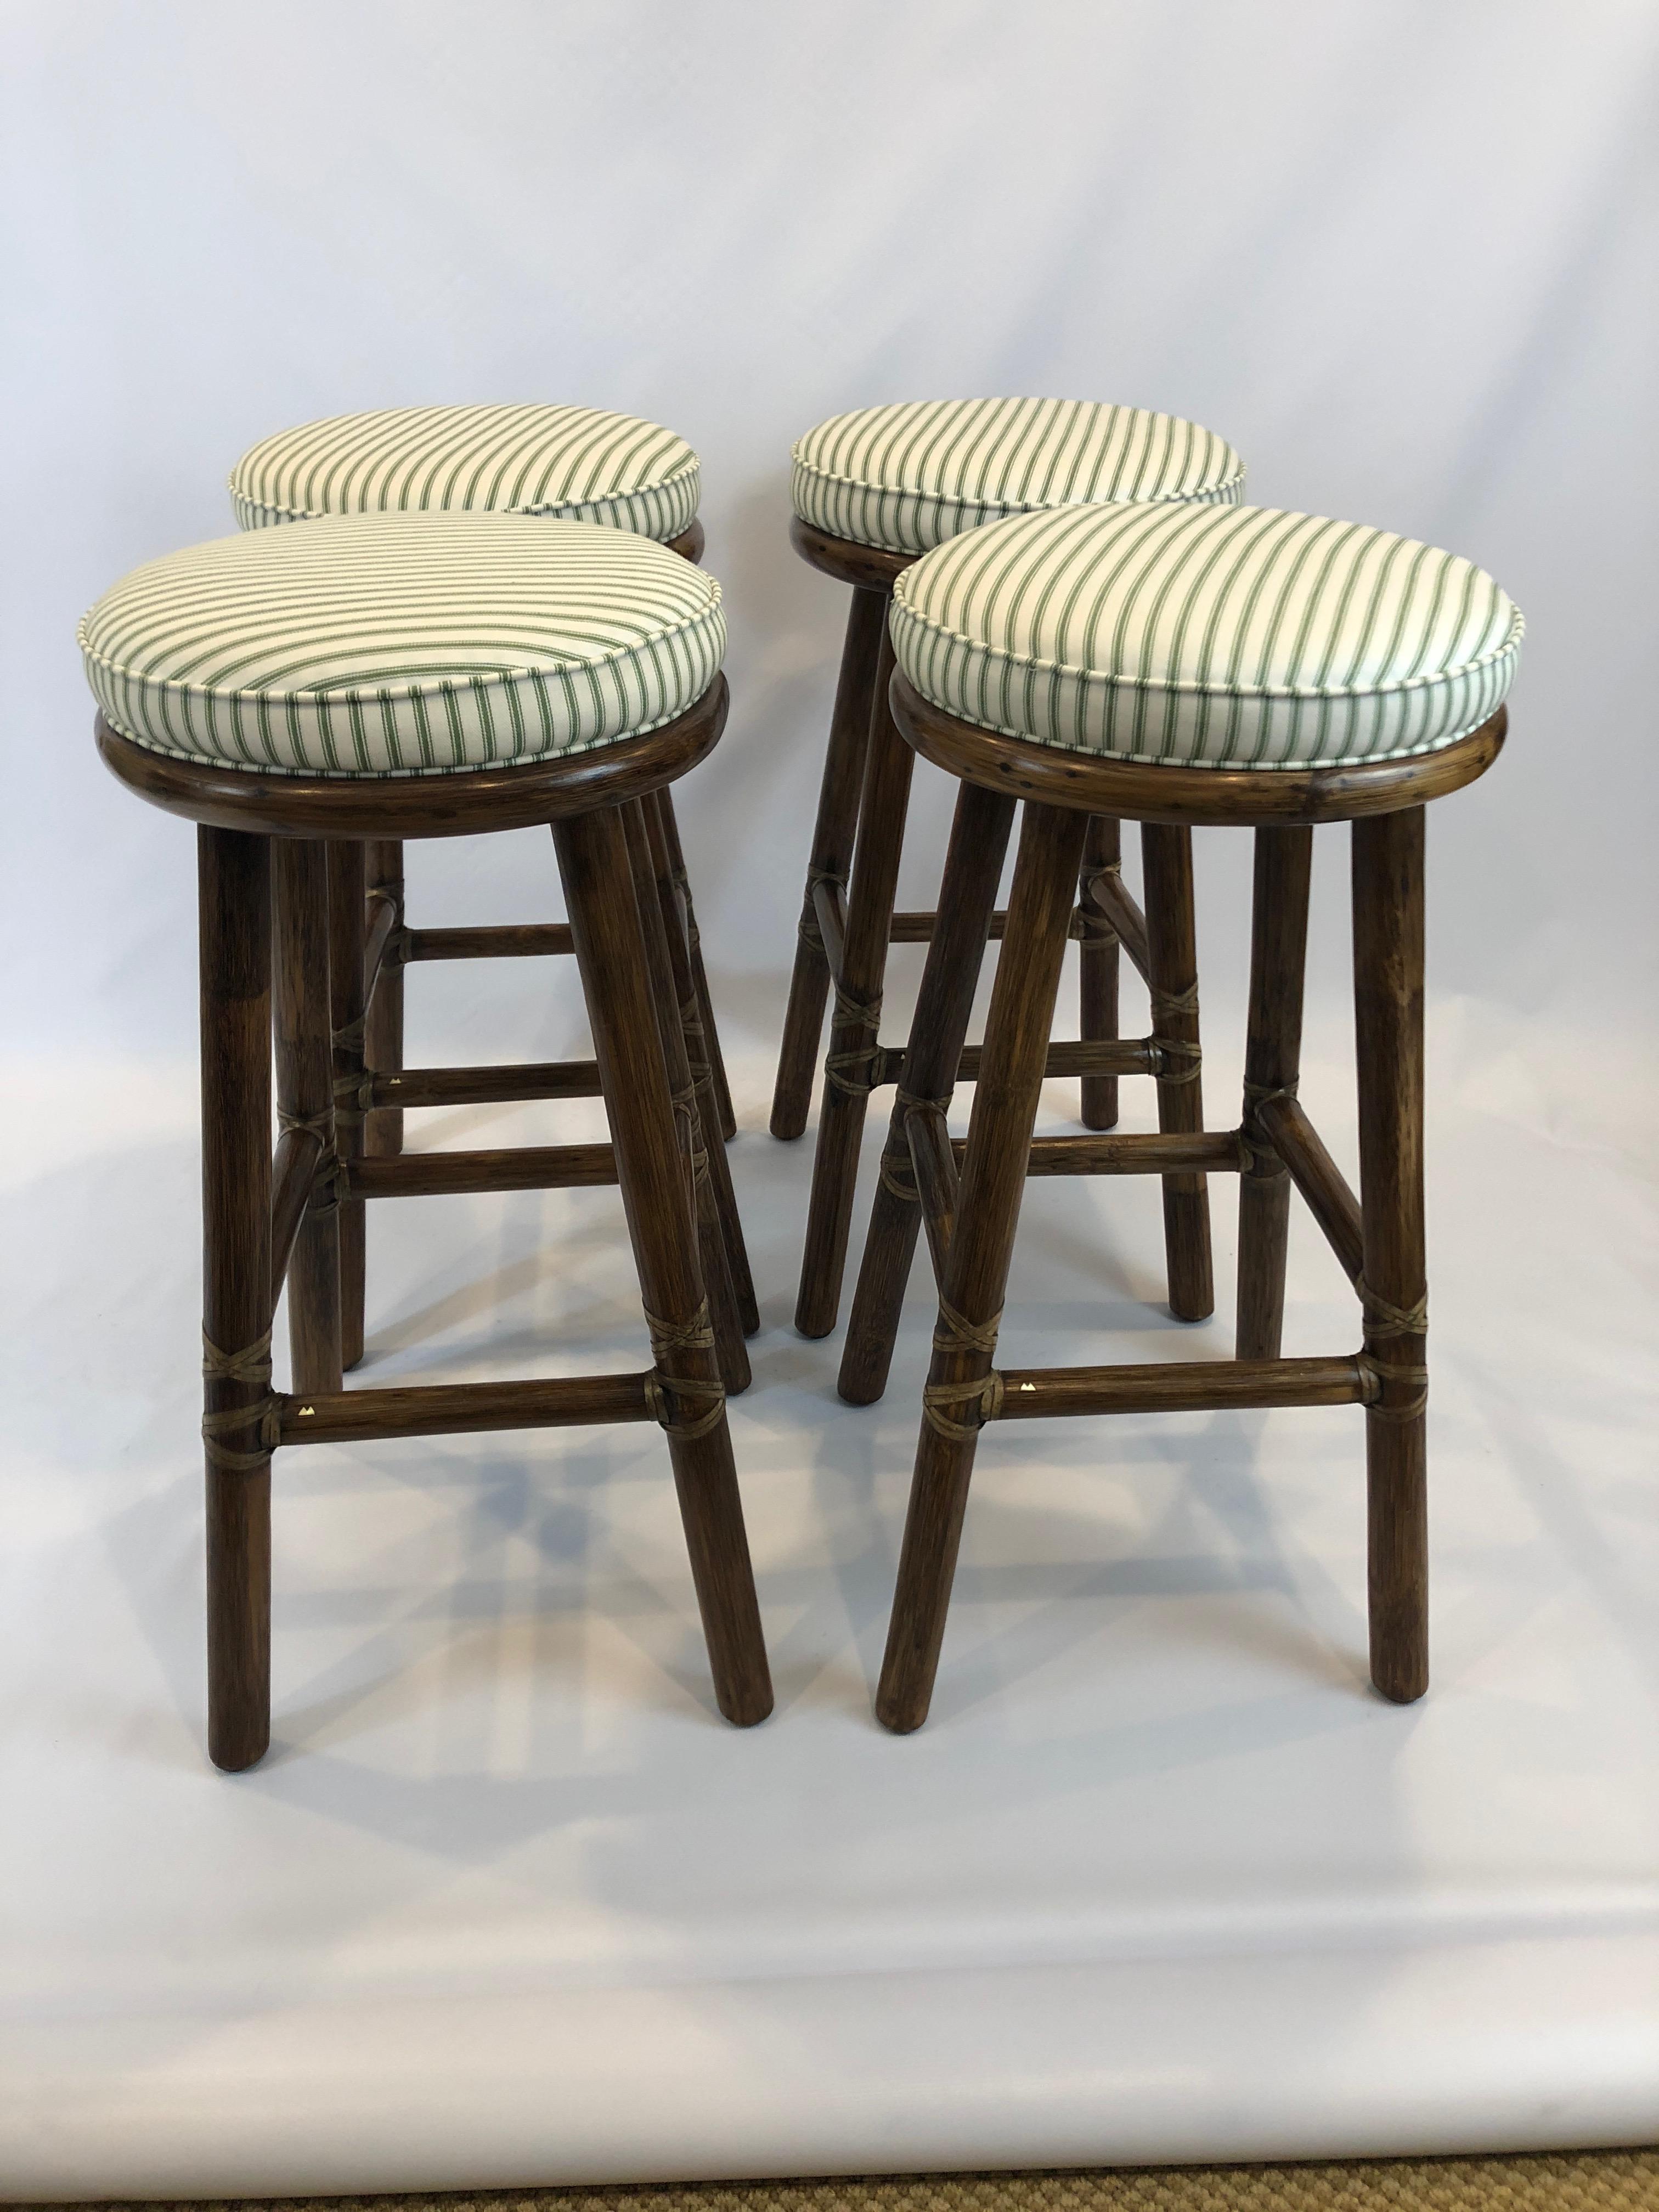 Beautifully made as only McGuire does it, a handsome set of 4 substantial tobacco colored bamboo bar stools having leather bindings and attached green and white striped seat cushions.
Bottom is 15.75 square.